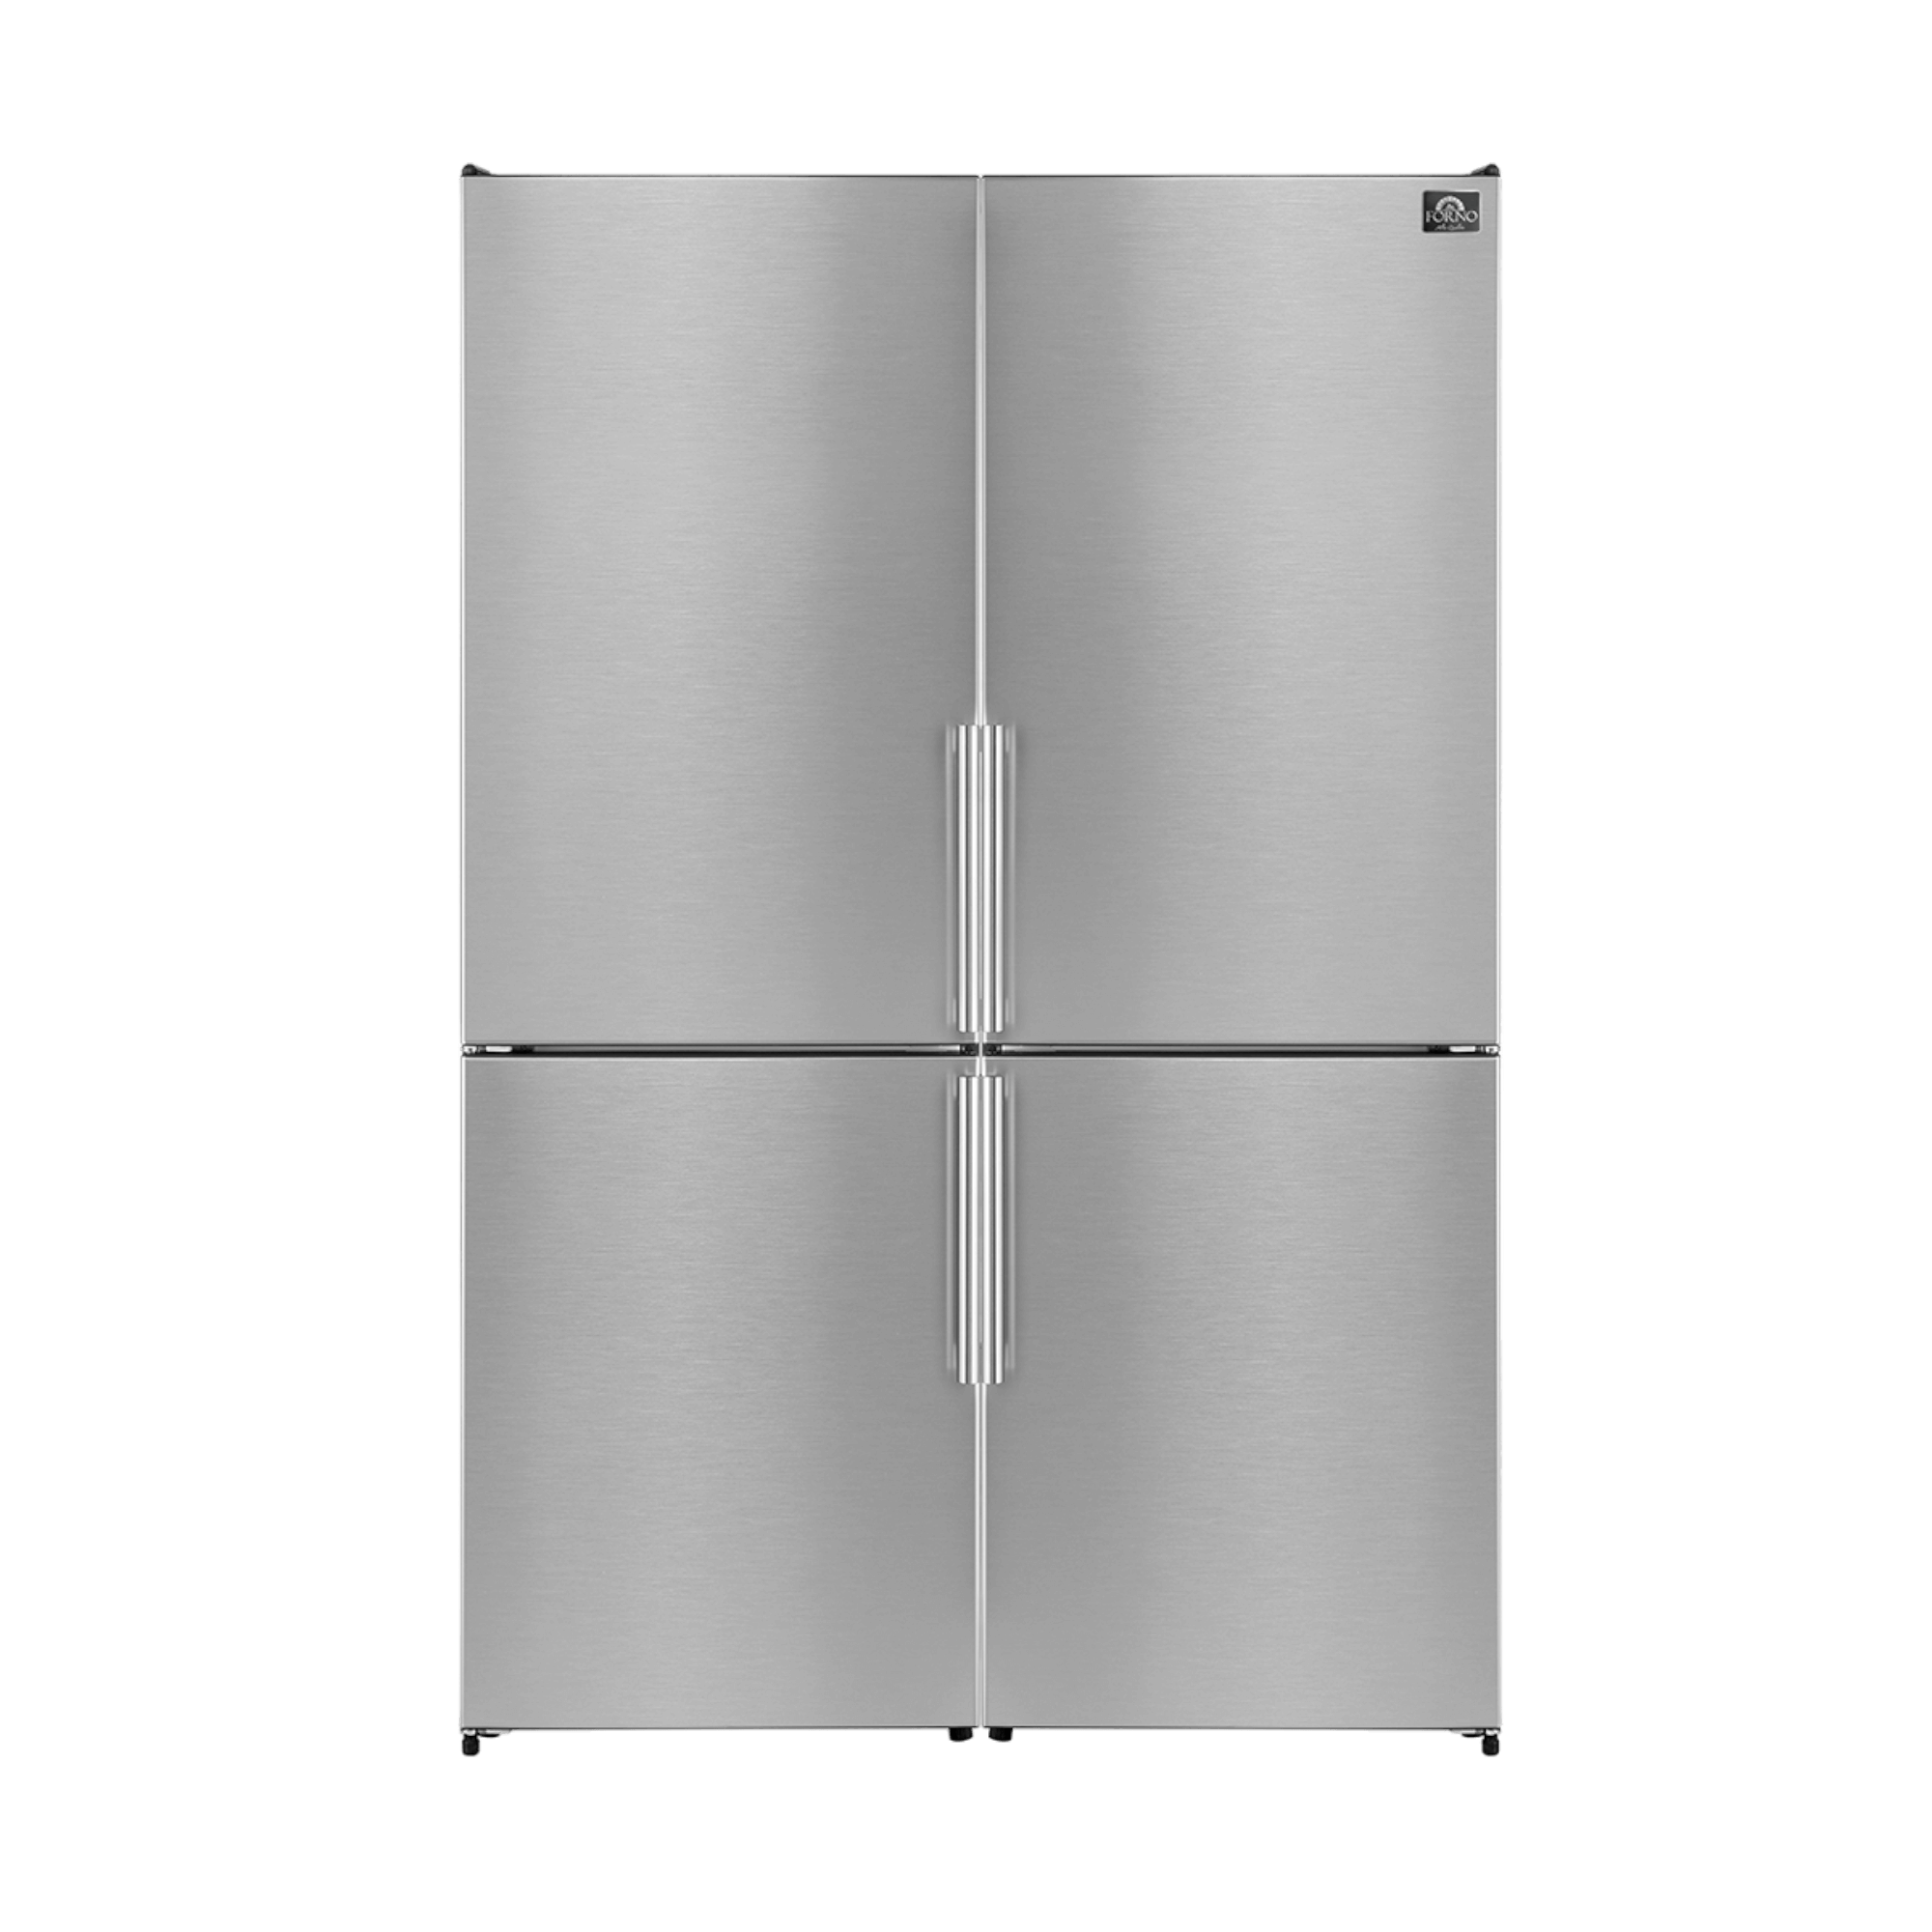 Forno 46.8" Bottom Mount 21.6 cu. ft. Refrigerator in Stainless Steel, FFFFD1778-48 Refrigerator FFFFD1778-48S Close Front View